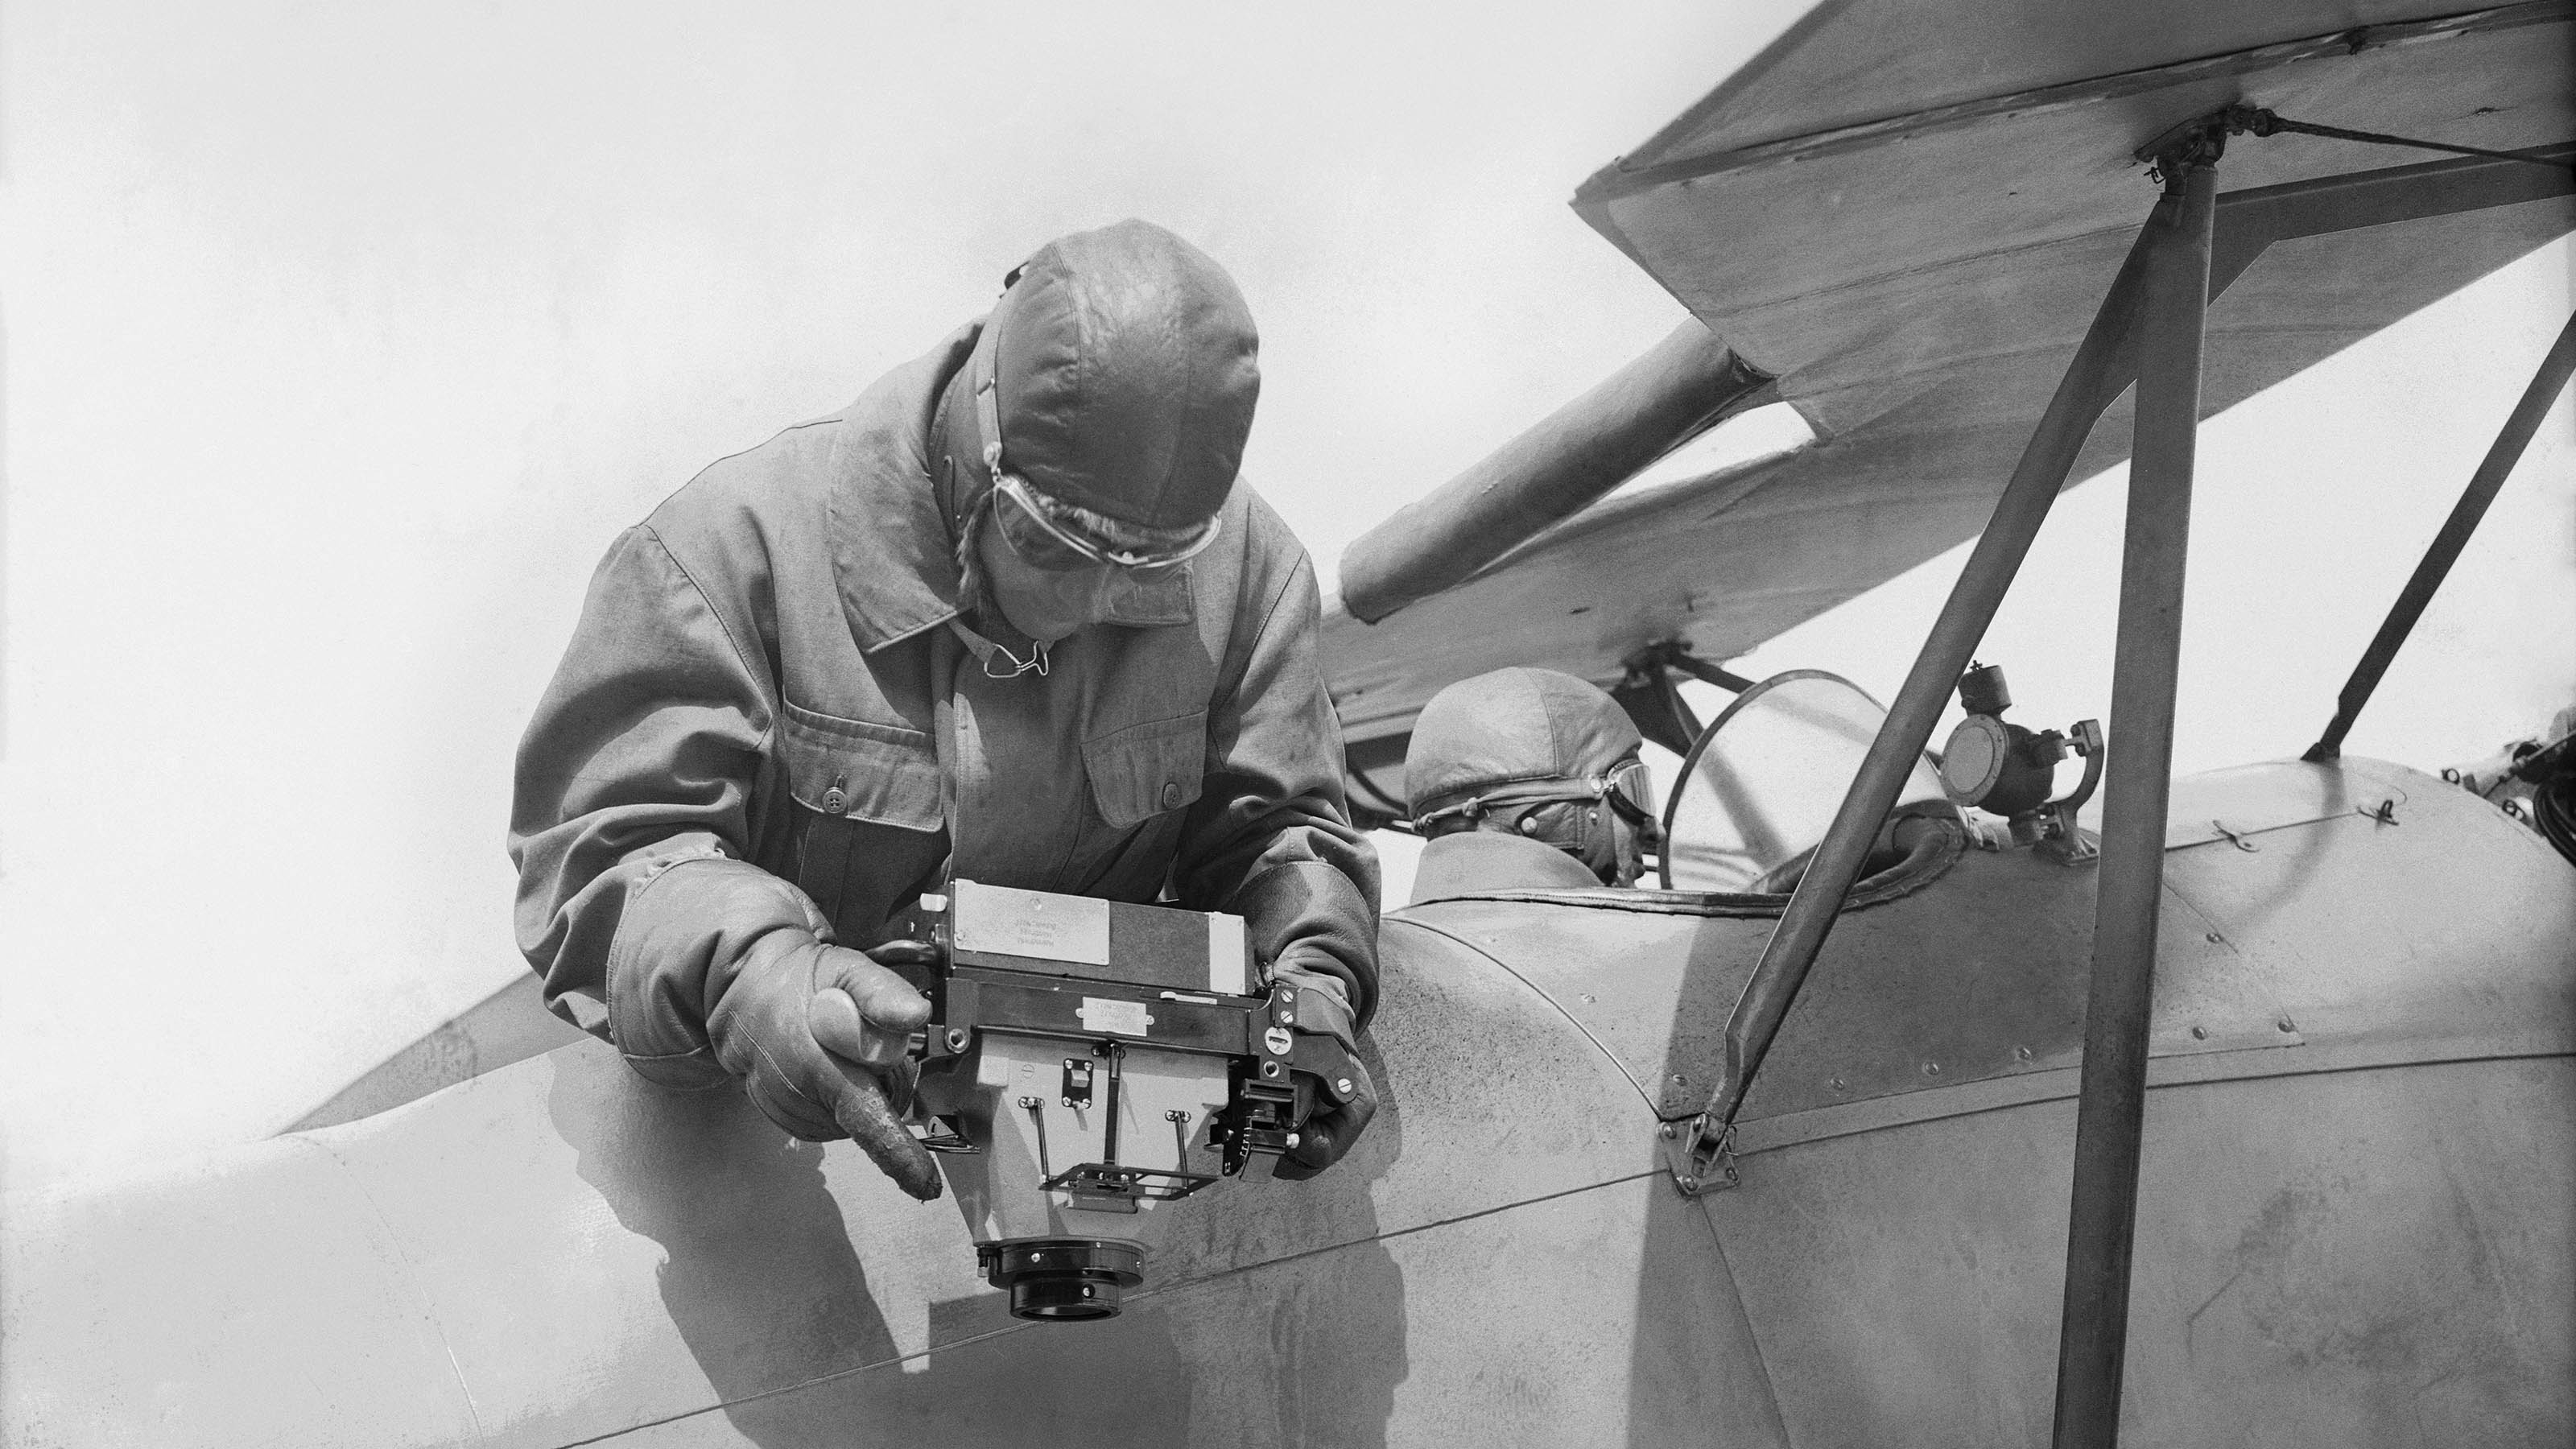 A pilot sits at the controls of an aircraft while the observer holds the aerial camera by hand overboard and photographs downwards.